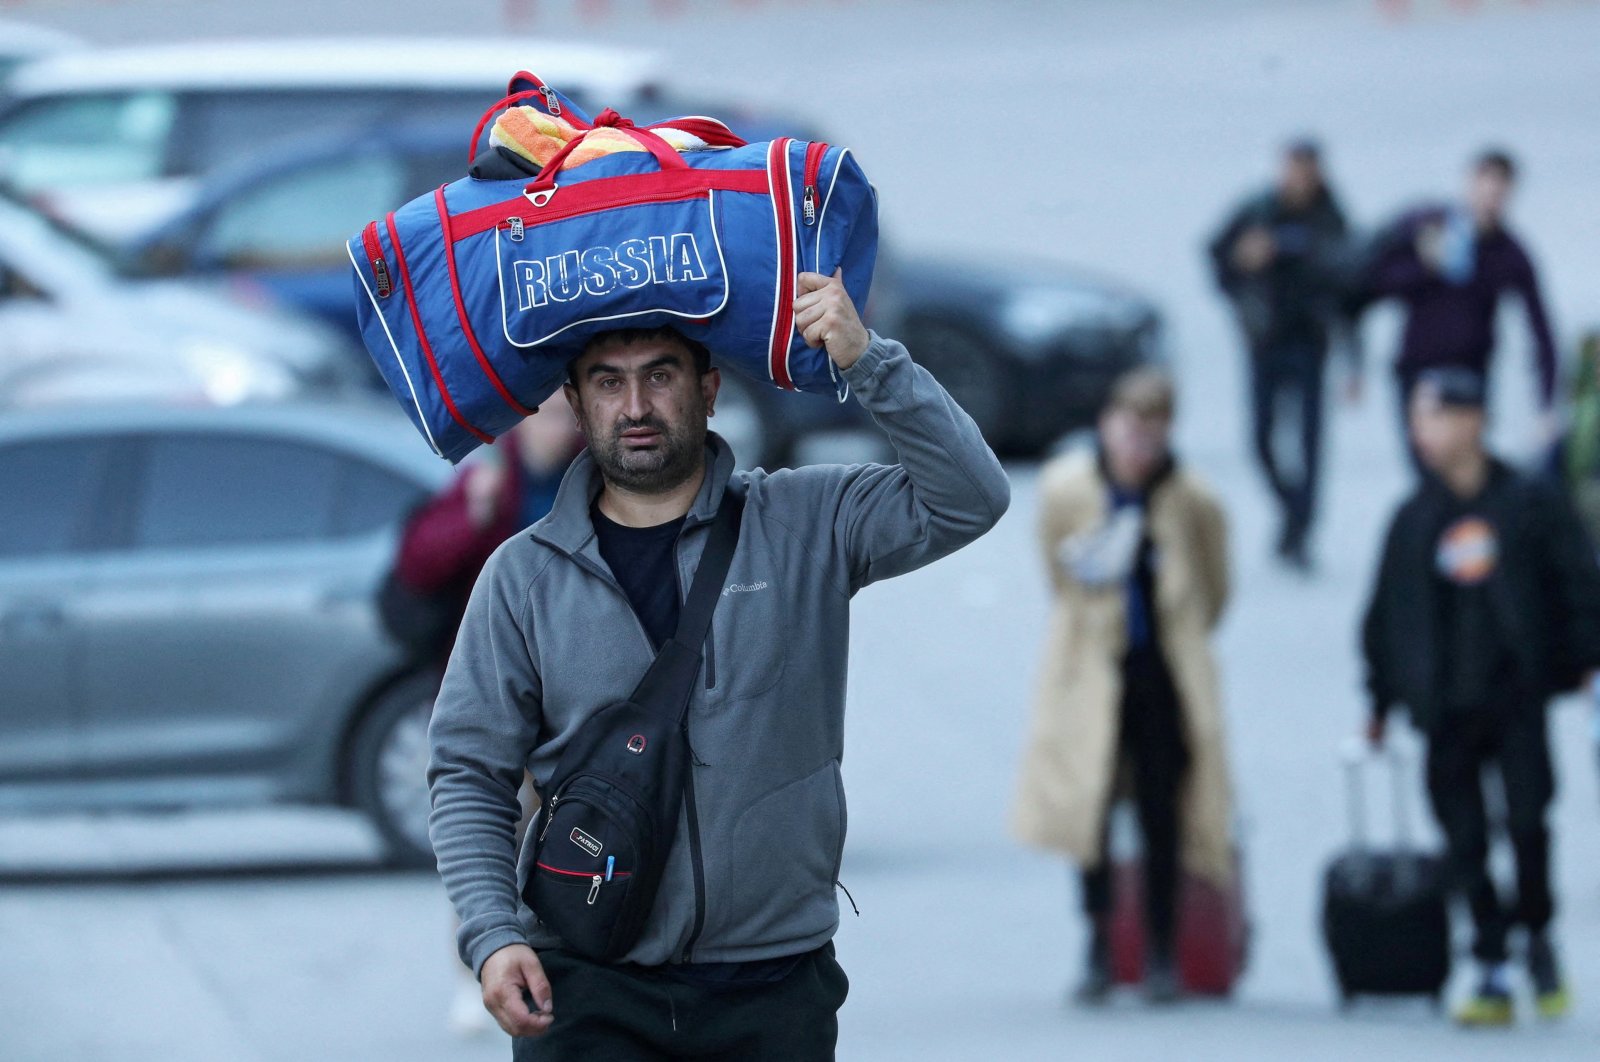 A man carries a bag on his head as he travels from Russia across the border to Georgia at the Zemo Larsi/Verkhny Lars station, Georgia, Sept. 26, 2022. (Reuters Photo)